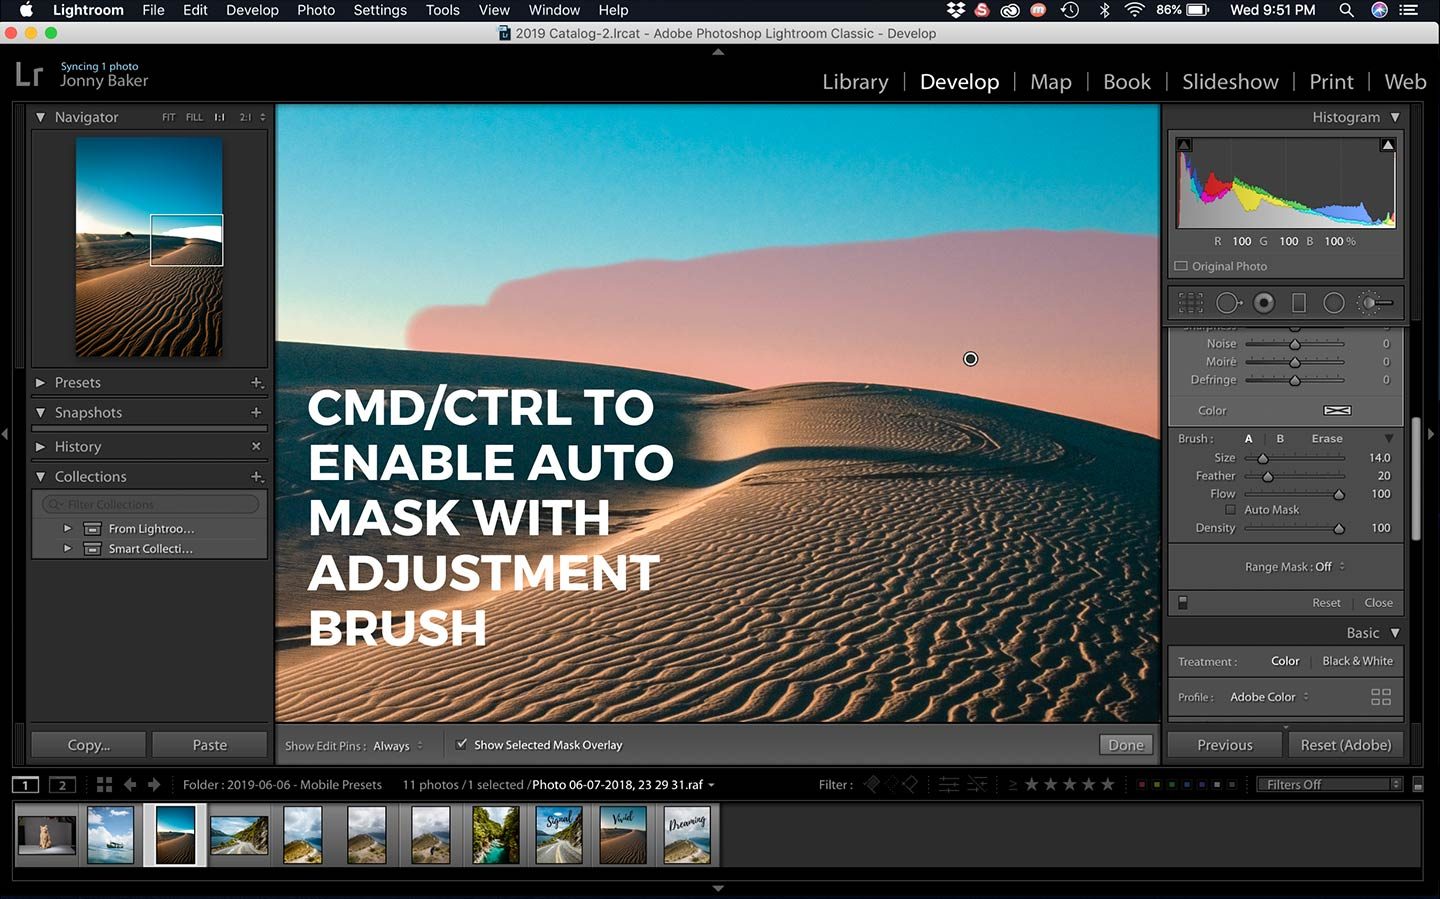 An amazing Lightroom Hack that can save you time is the use of the auto mask function when using the spot removal tool. You can see what that looks like in the screenshot.